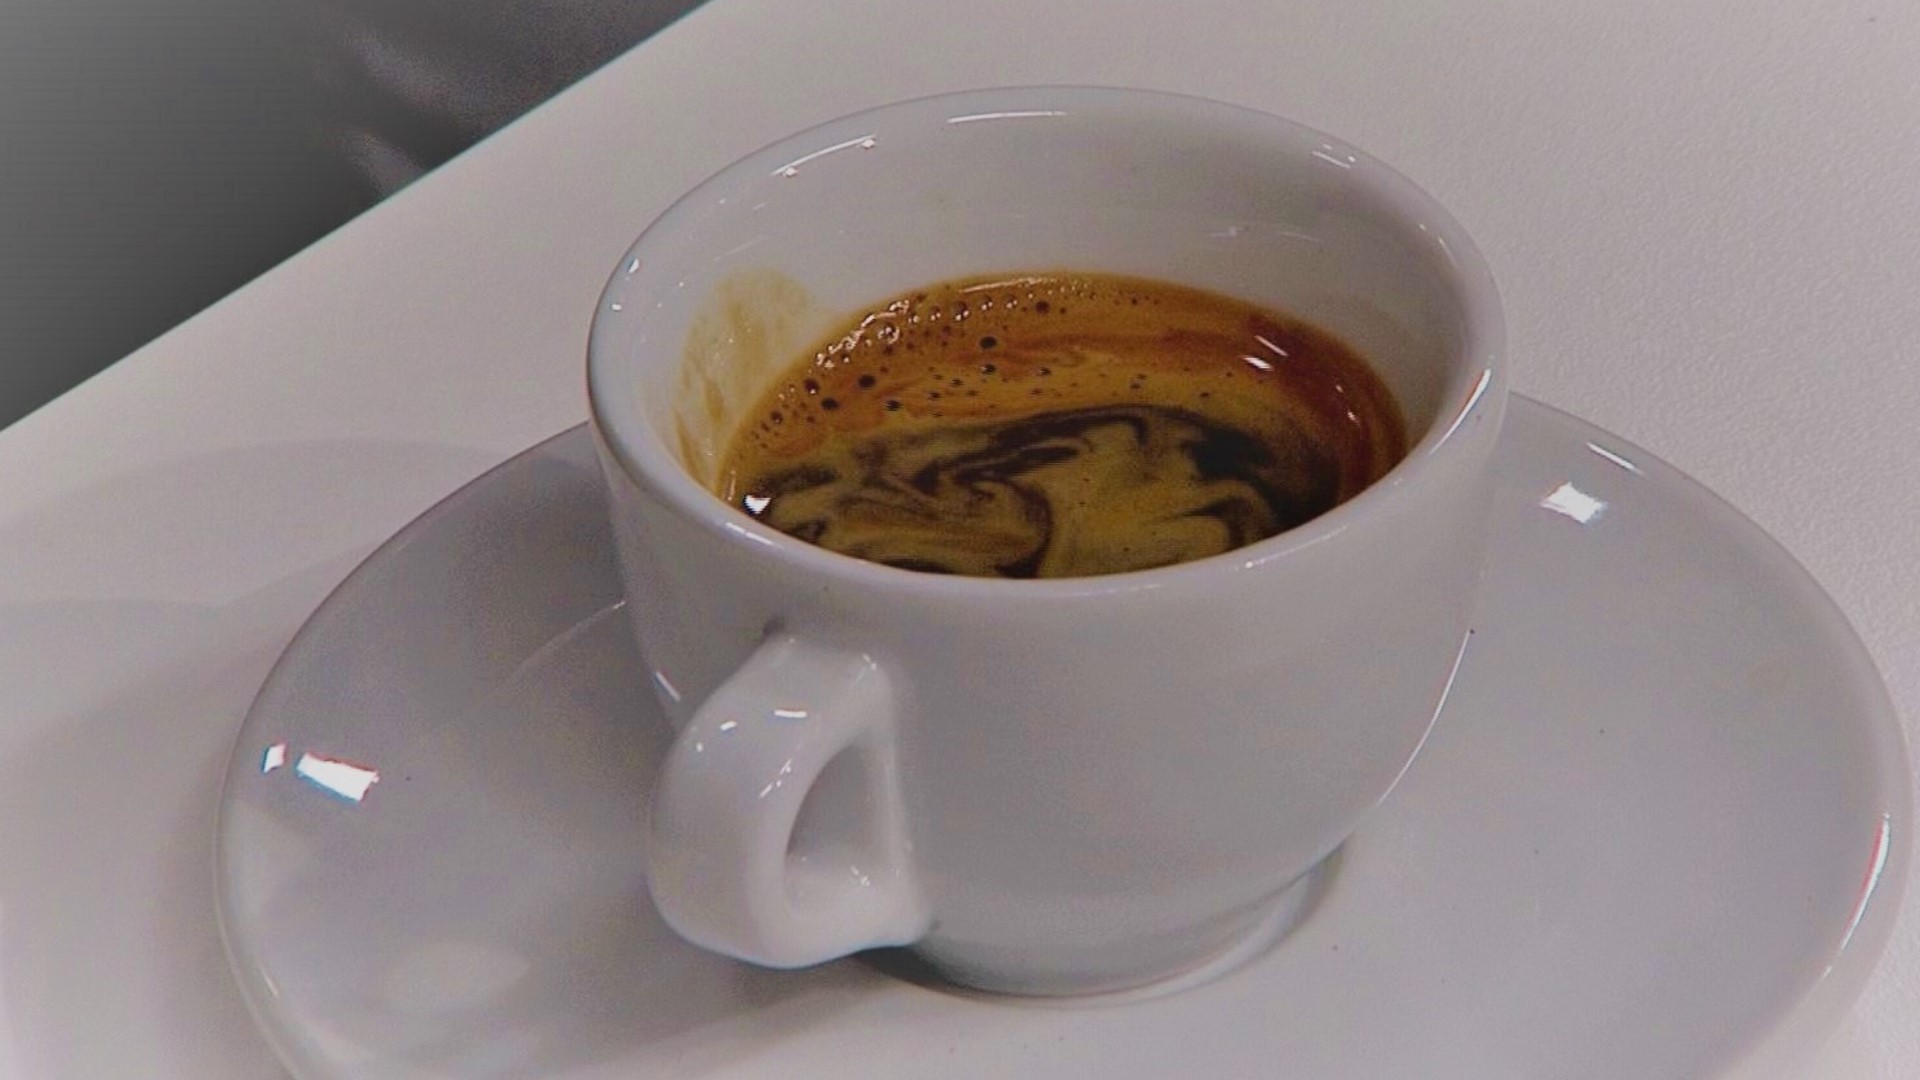 Italian for "corrected coffee," the Caffe Corretto puts a spin on your favorite cup of espresso - just add brandy. Leah Muhm from La Marzocco is showing us how it's done, and how we can jazz up our other go-to coffee drinks.